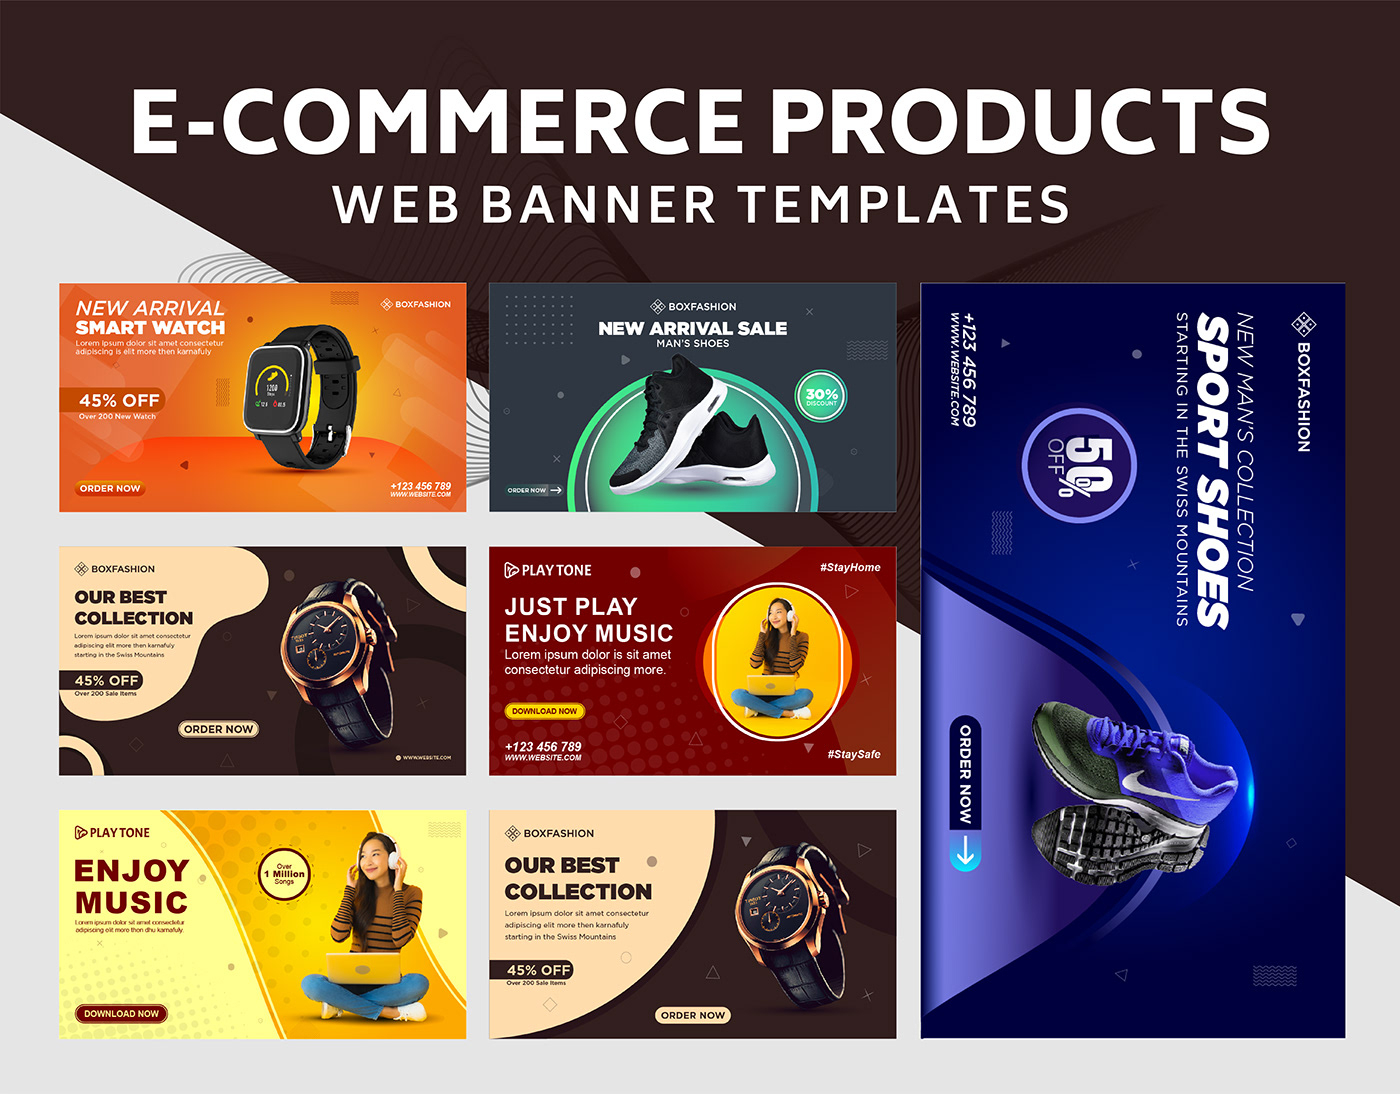 E Commerce Products Web Banner Template Free Download On Behance Intended For Website Banner Templates Free Download